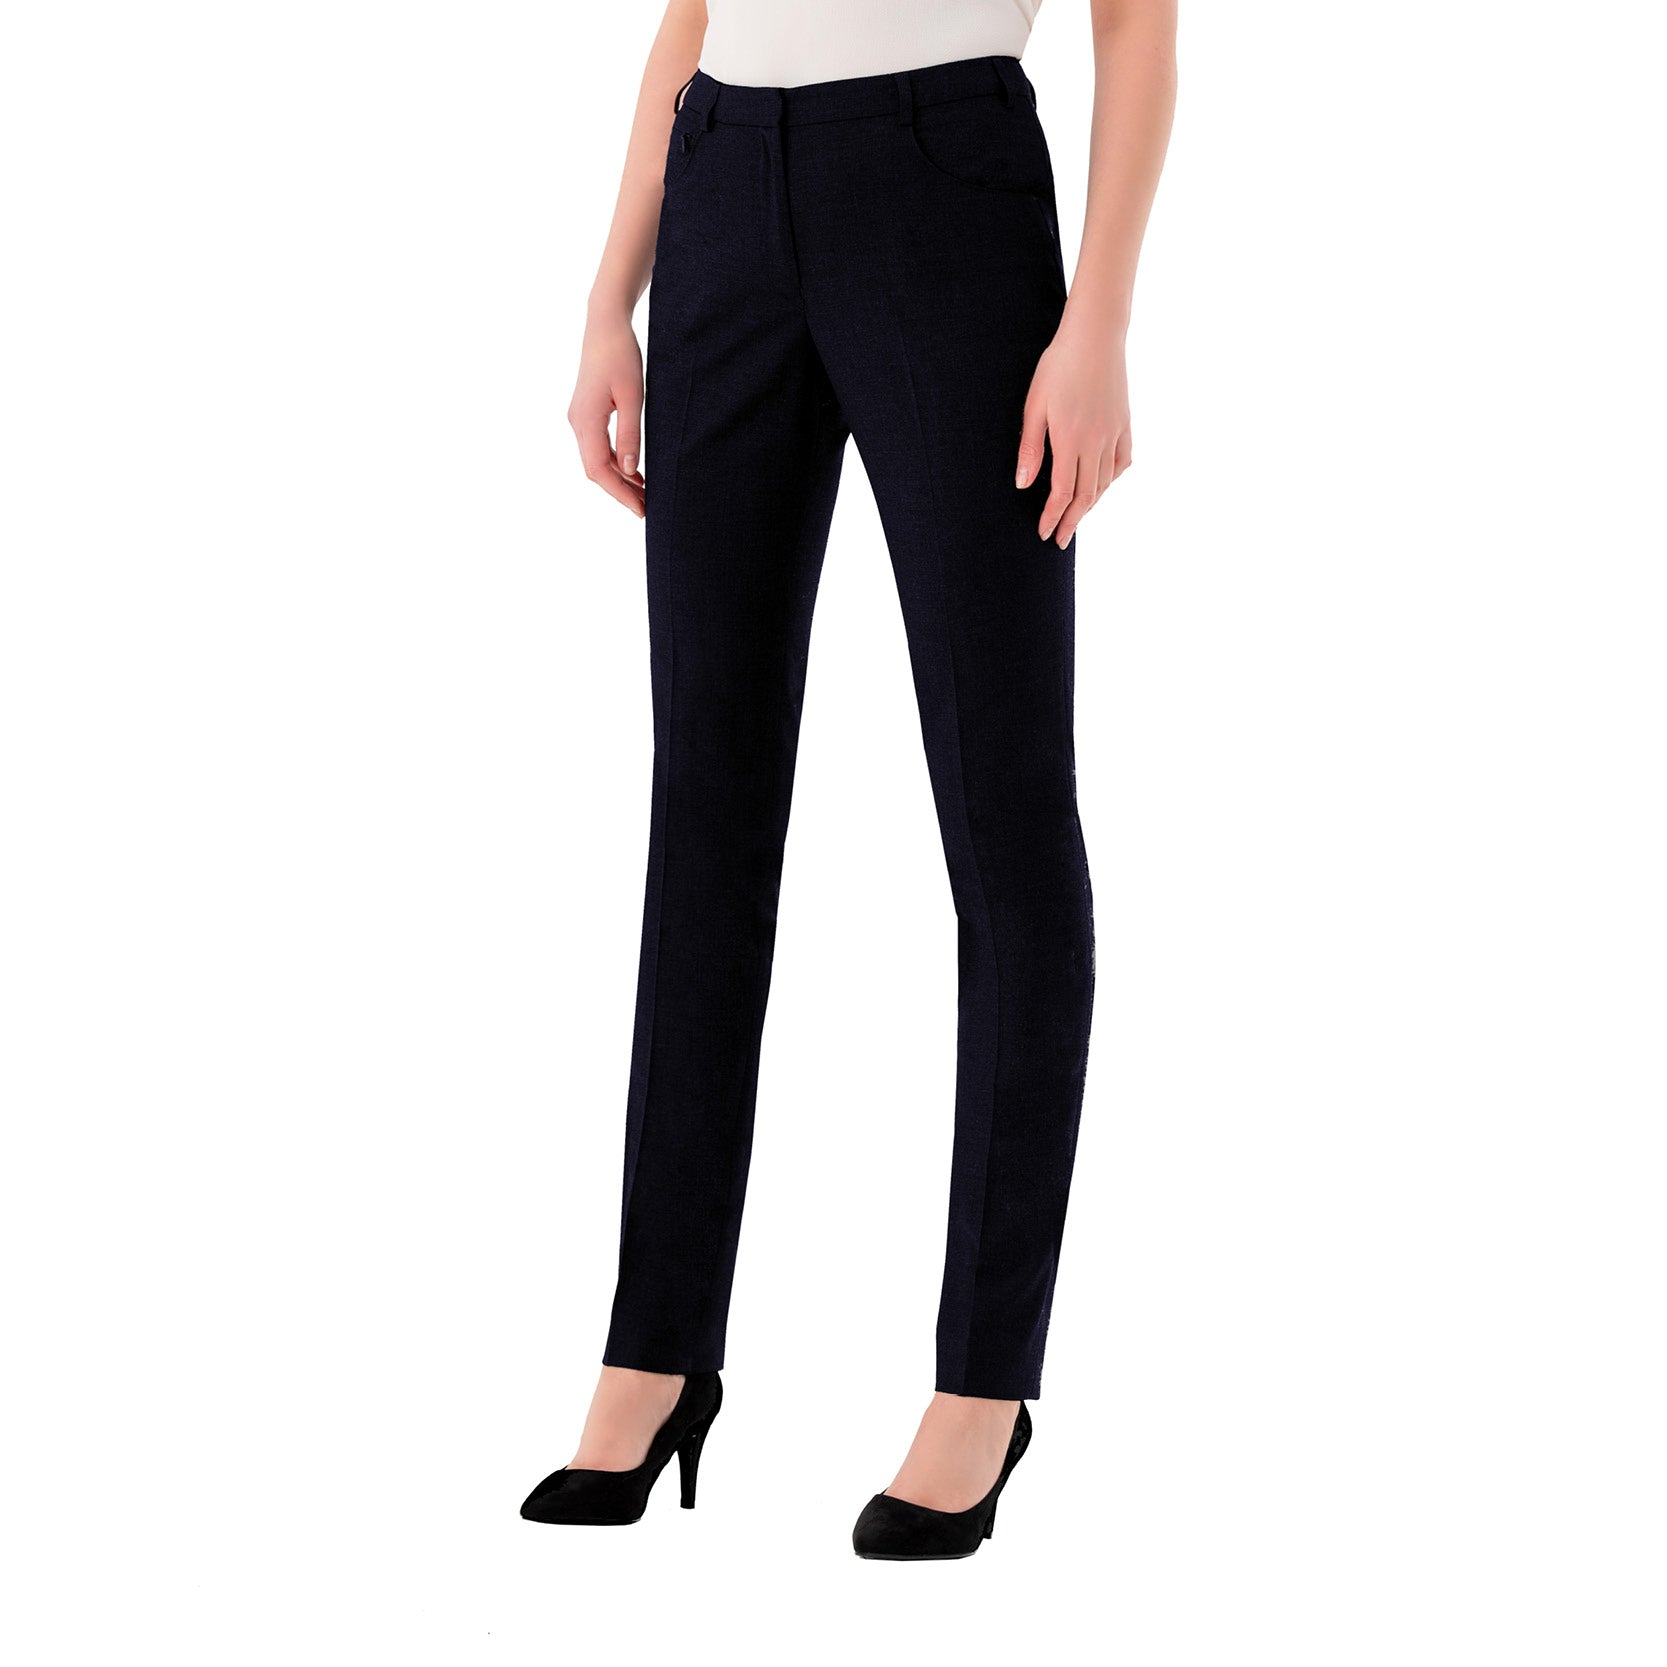 TOPSRANI Women High Waisted Dress Pants Work Trousers Slacks Bottoms Casual  Pull On Long Stretch Solid Office Business Tall Slim Fit Black S at Amazon  Women's Clothing store